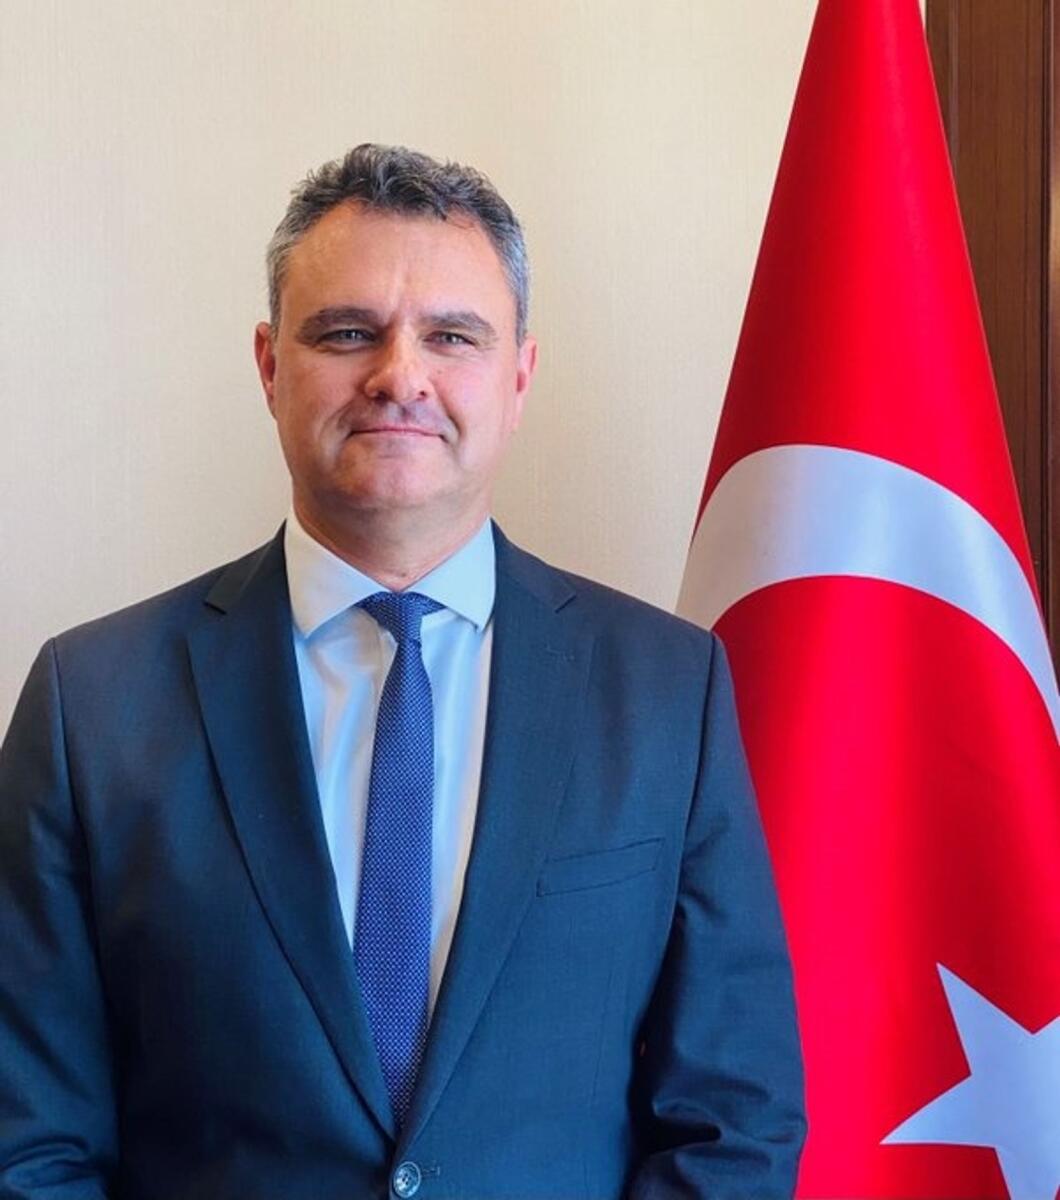 Tugay Tuncer, Ambassador of the Republic of Türkiye to the UAE, said this year, as we celebrate the 50th Anniversary of the Establishment of Diplomatic Relations between our countries, we are delighted that it coincides with a new chapter of collaboration for our nations.